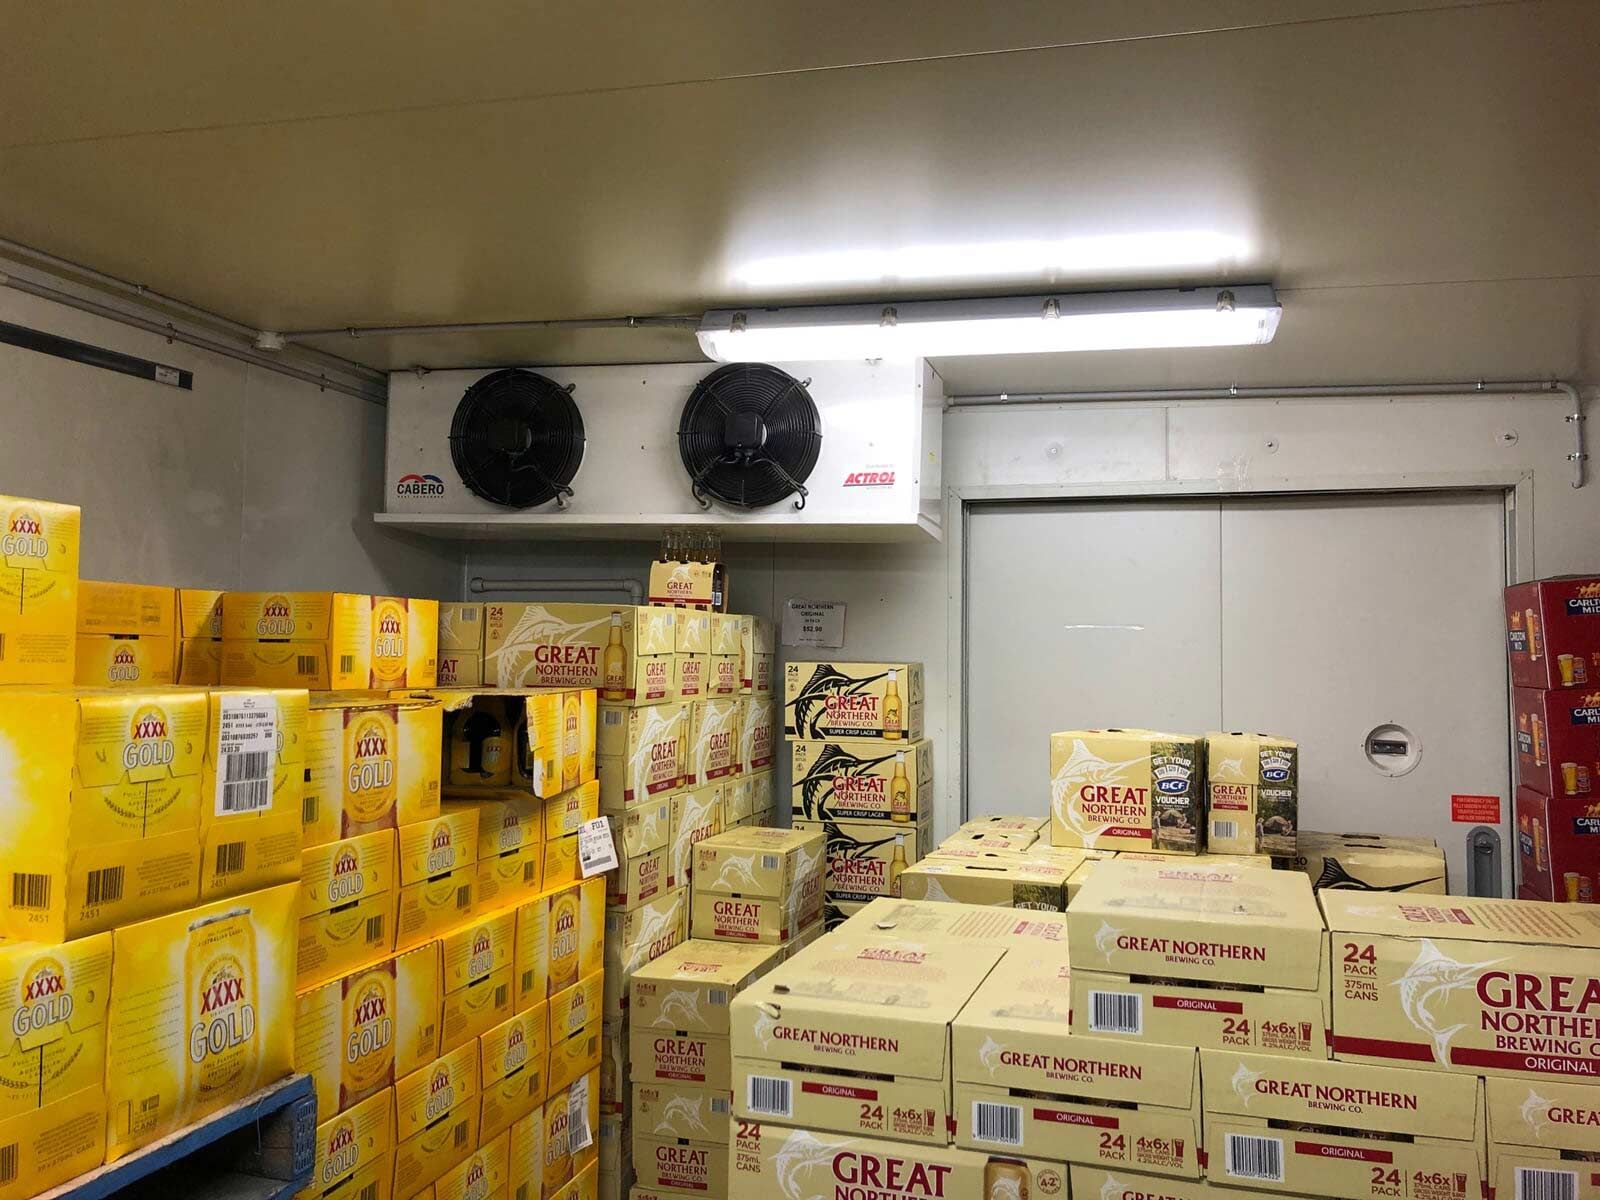 Boxes Inside the Stock Room - Refrigeration Service in South Burnett, QLD